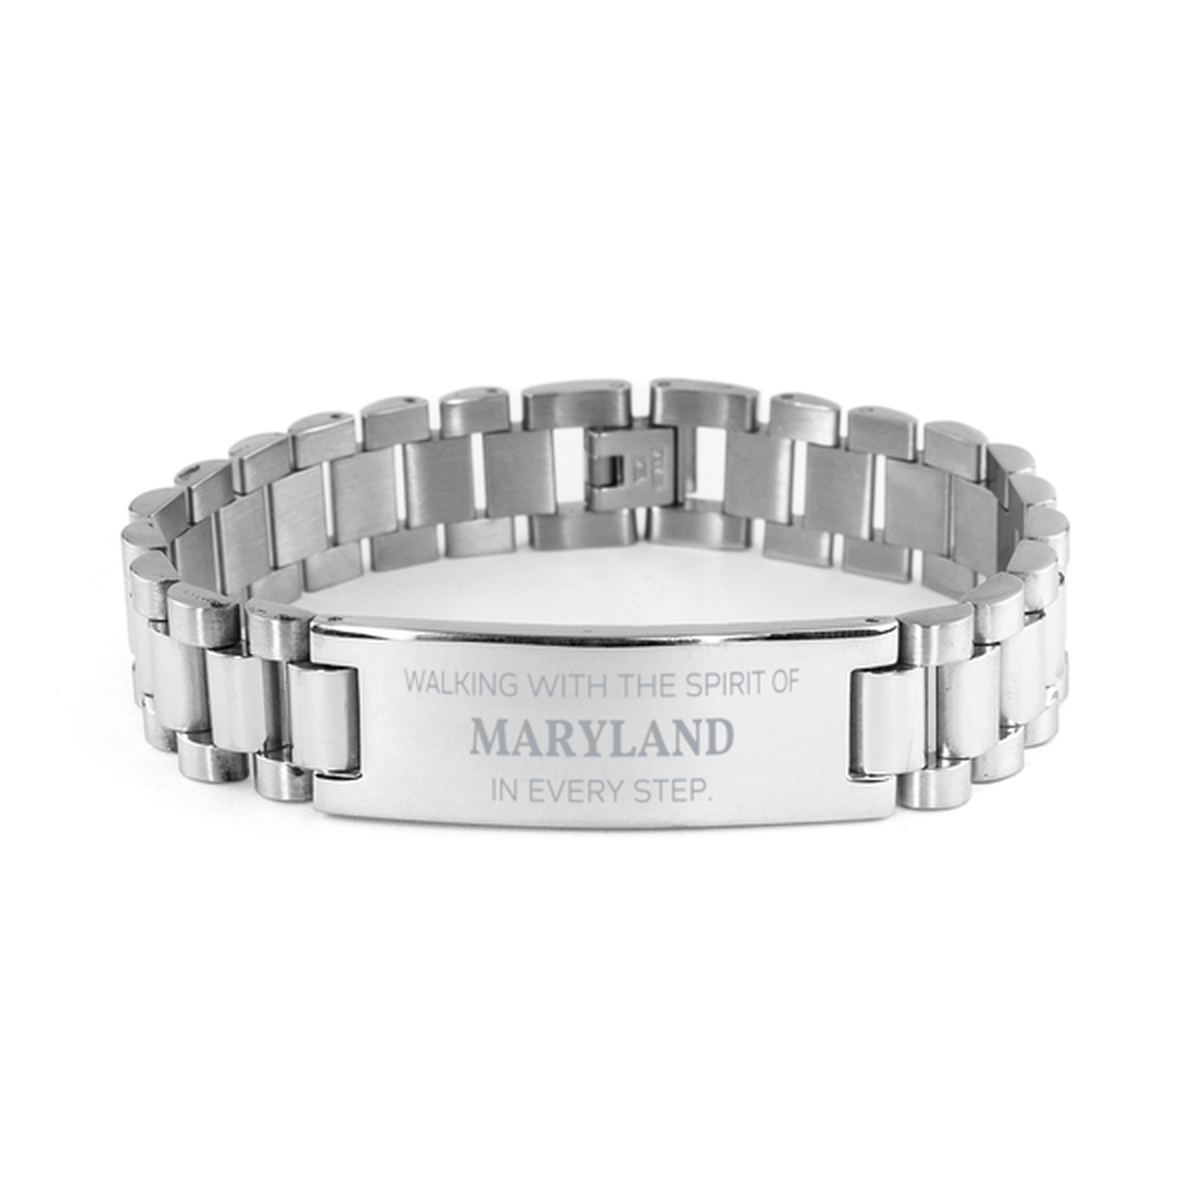 Maryland Gifts, Walking with the spirit, Love Maryland Birthday Christmas Ladder Stainless Steel Bracelet For Maryland People, Men, Women, Friends